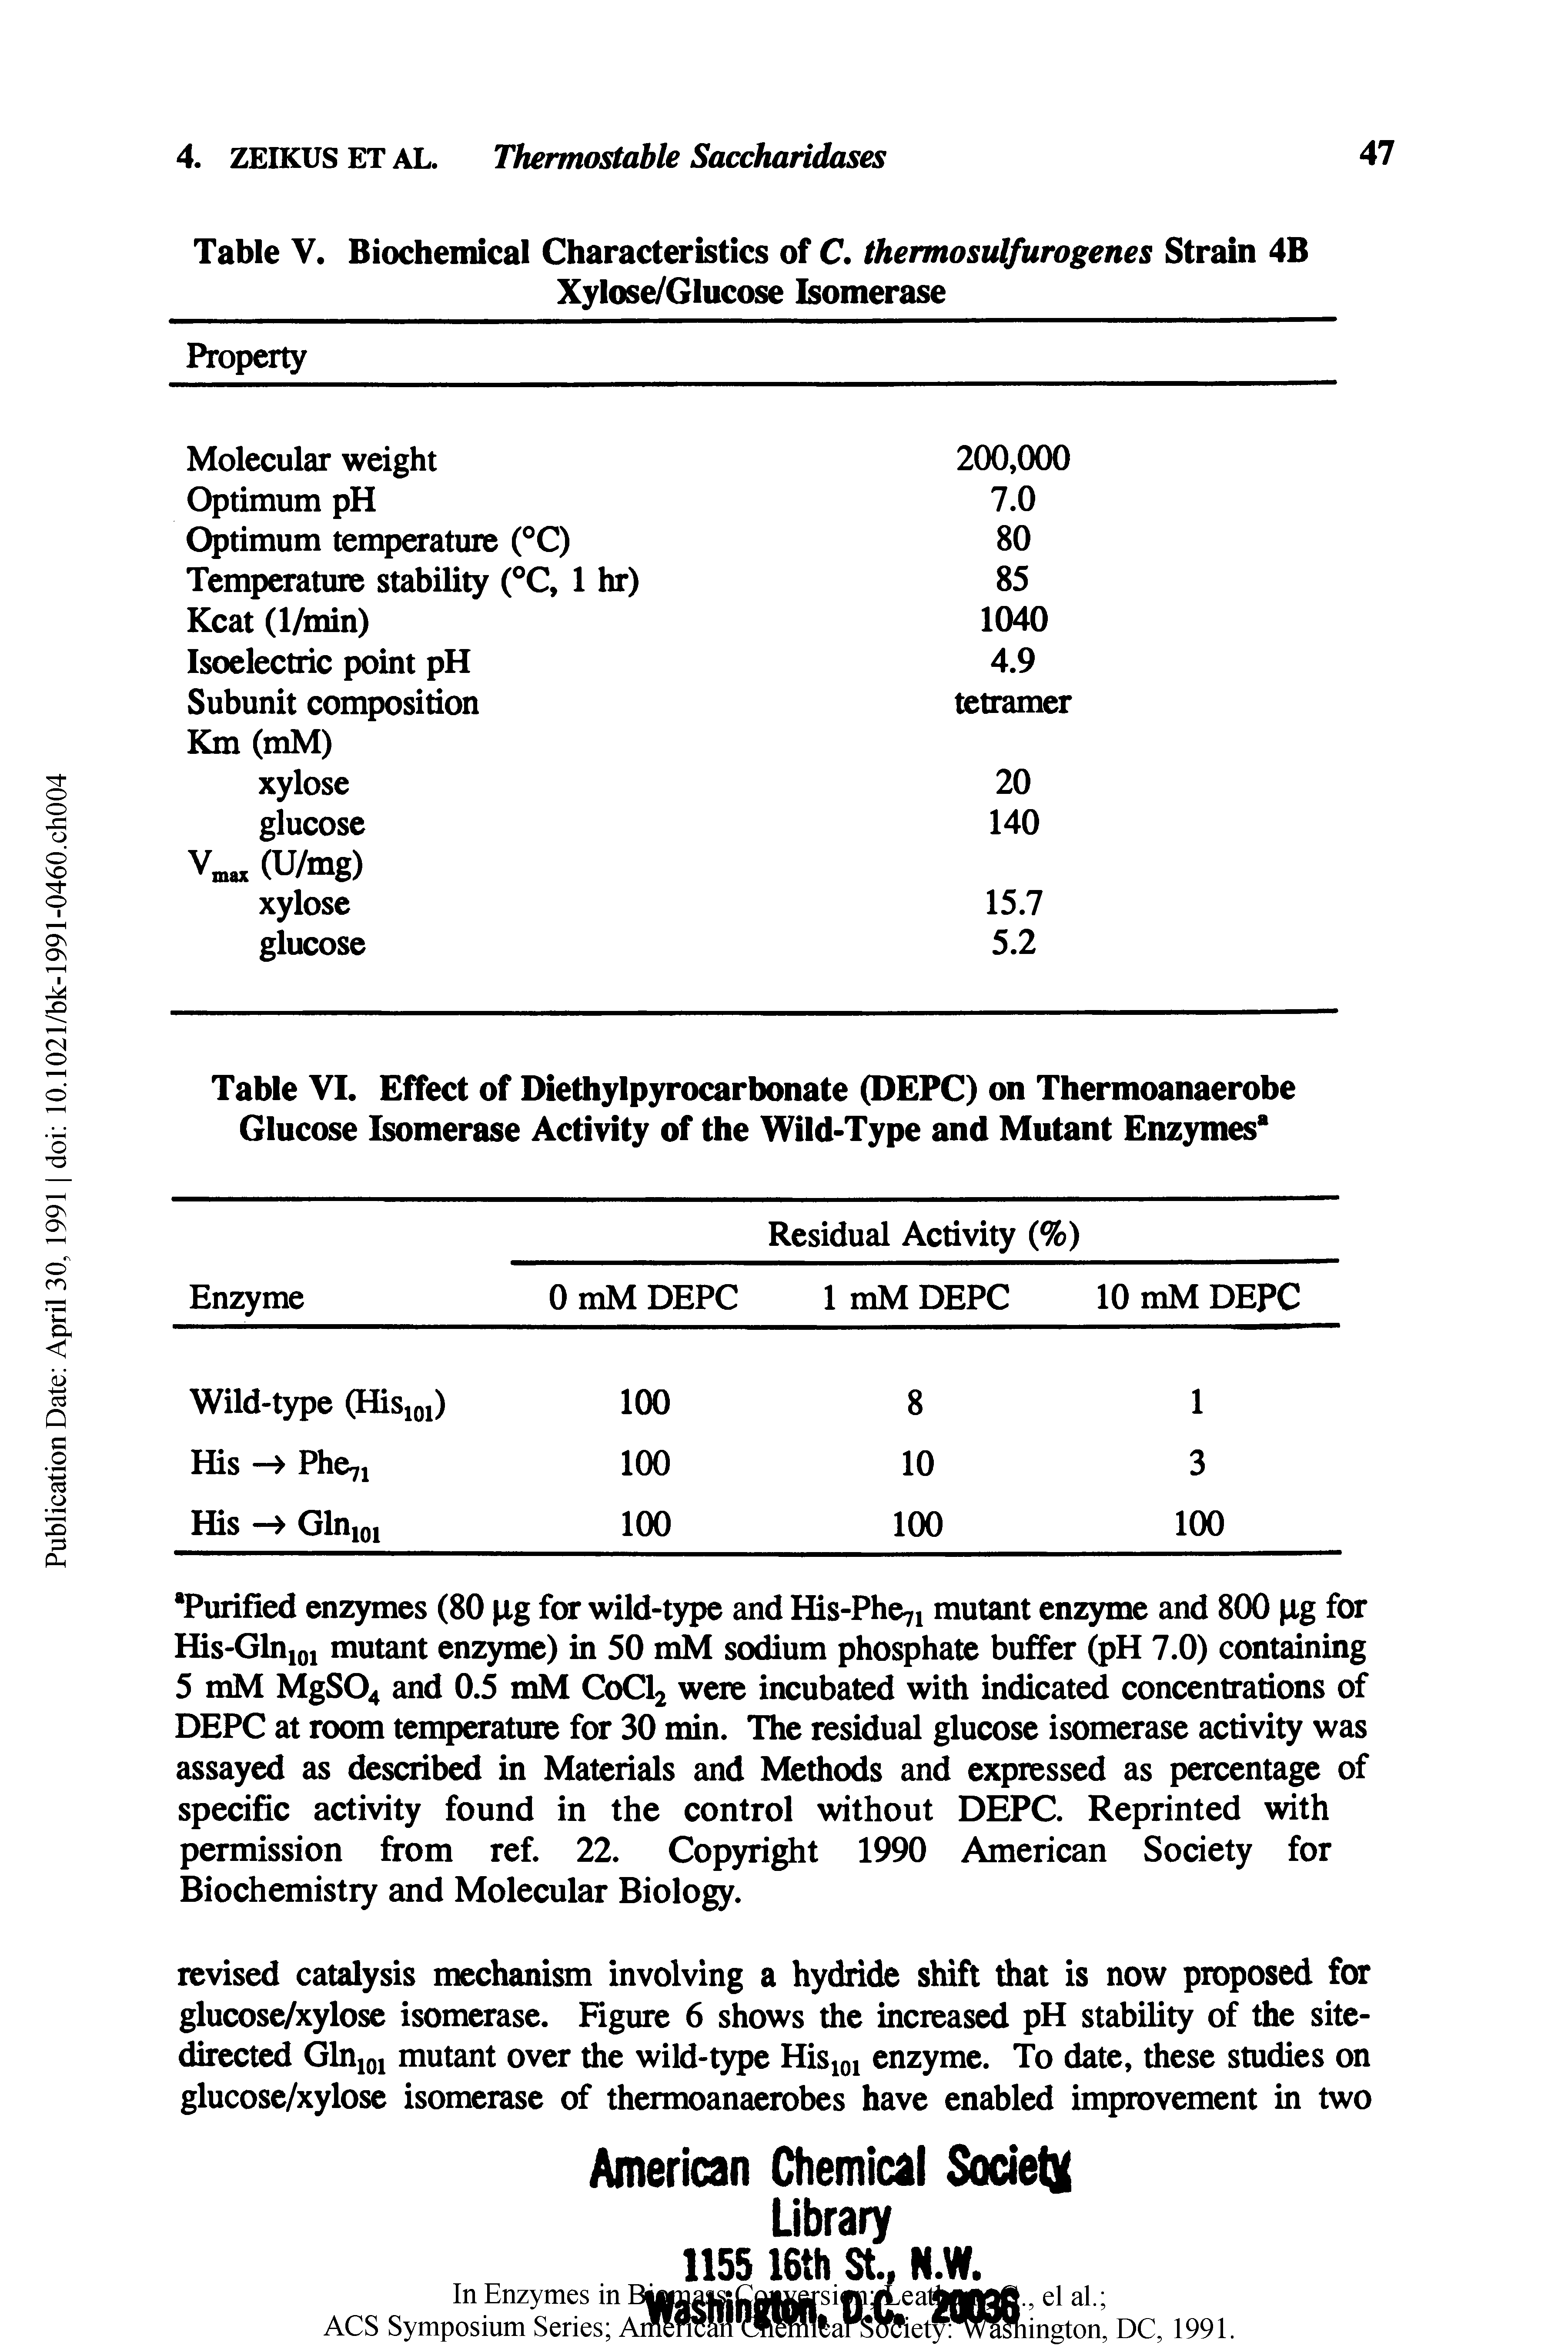 Table VI. Effect of Diethylpyrocarbonate (DEPC) on Thermoanaerobe Glucose Isomerase Activity of the Wild-Type and Mutant Enzymes ...